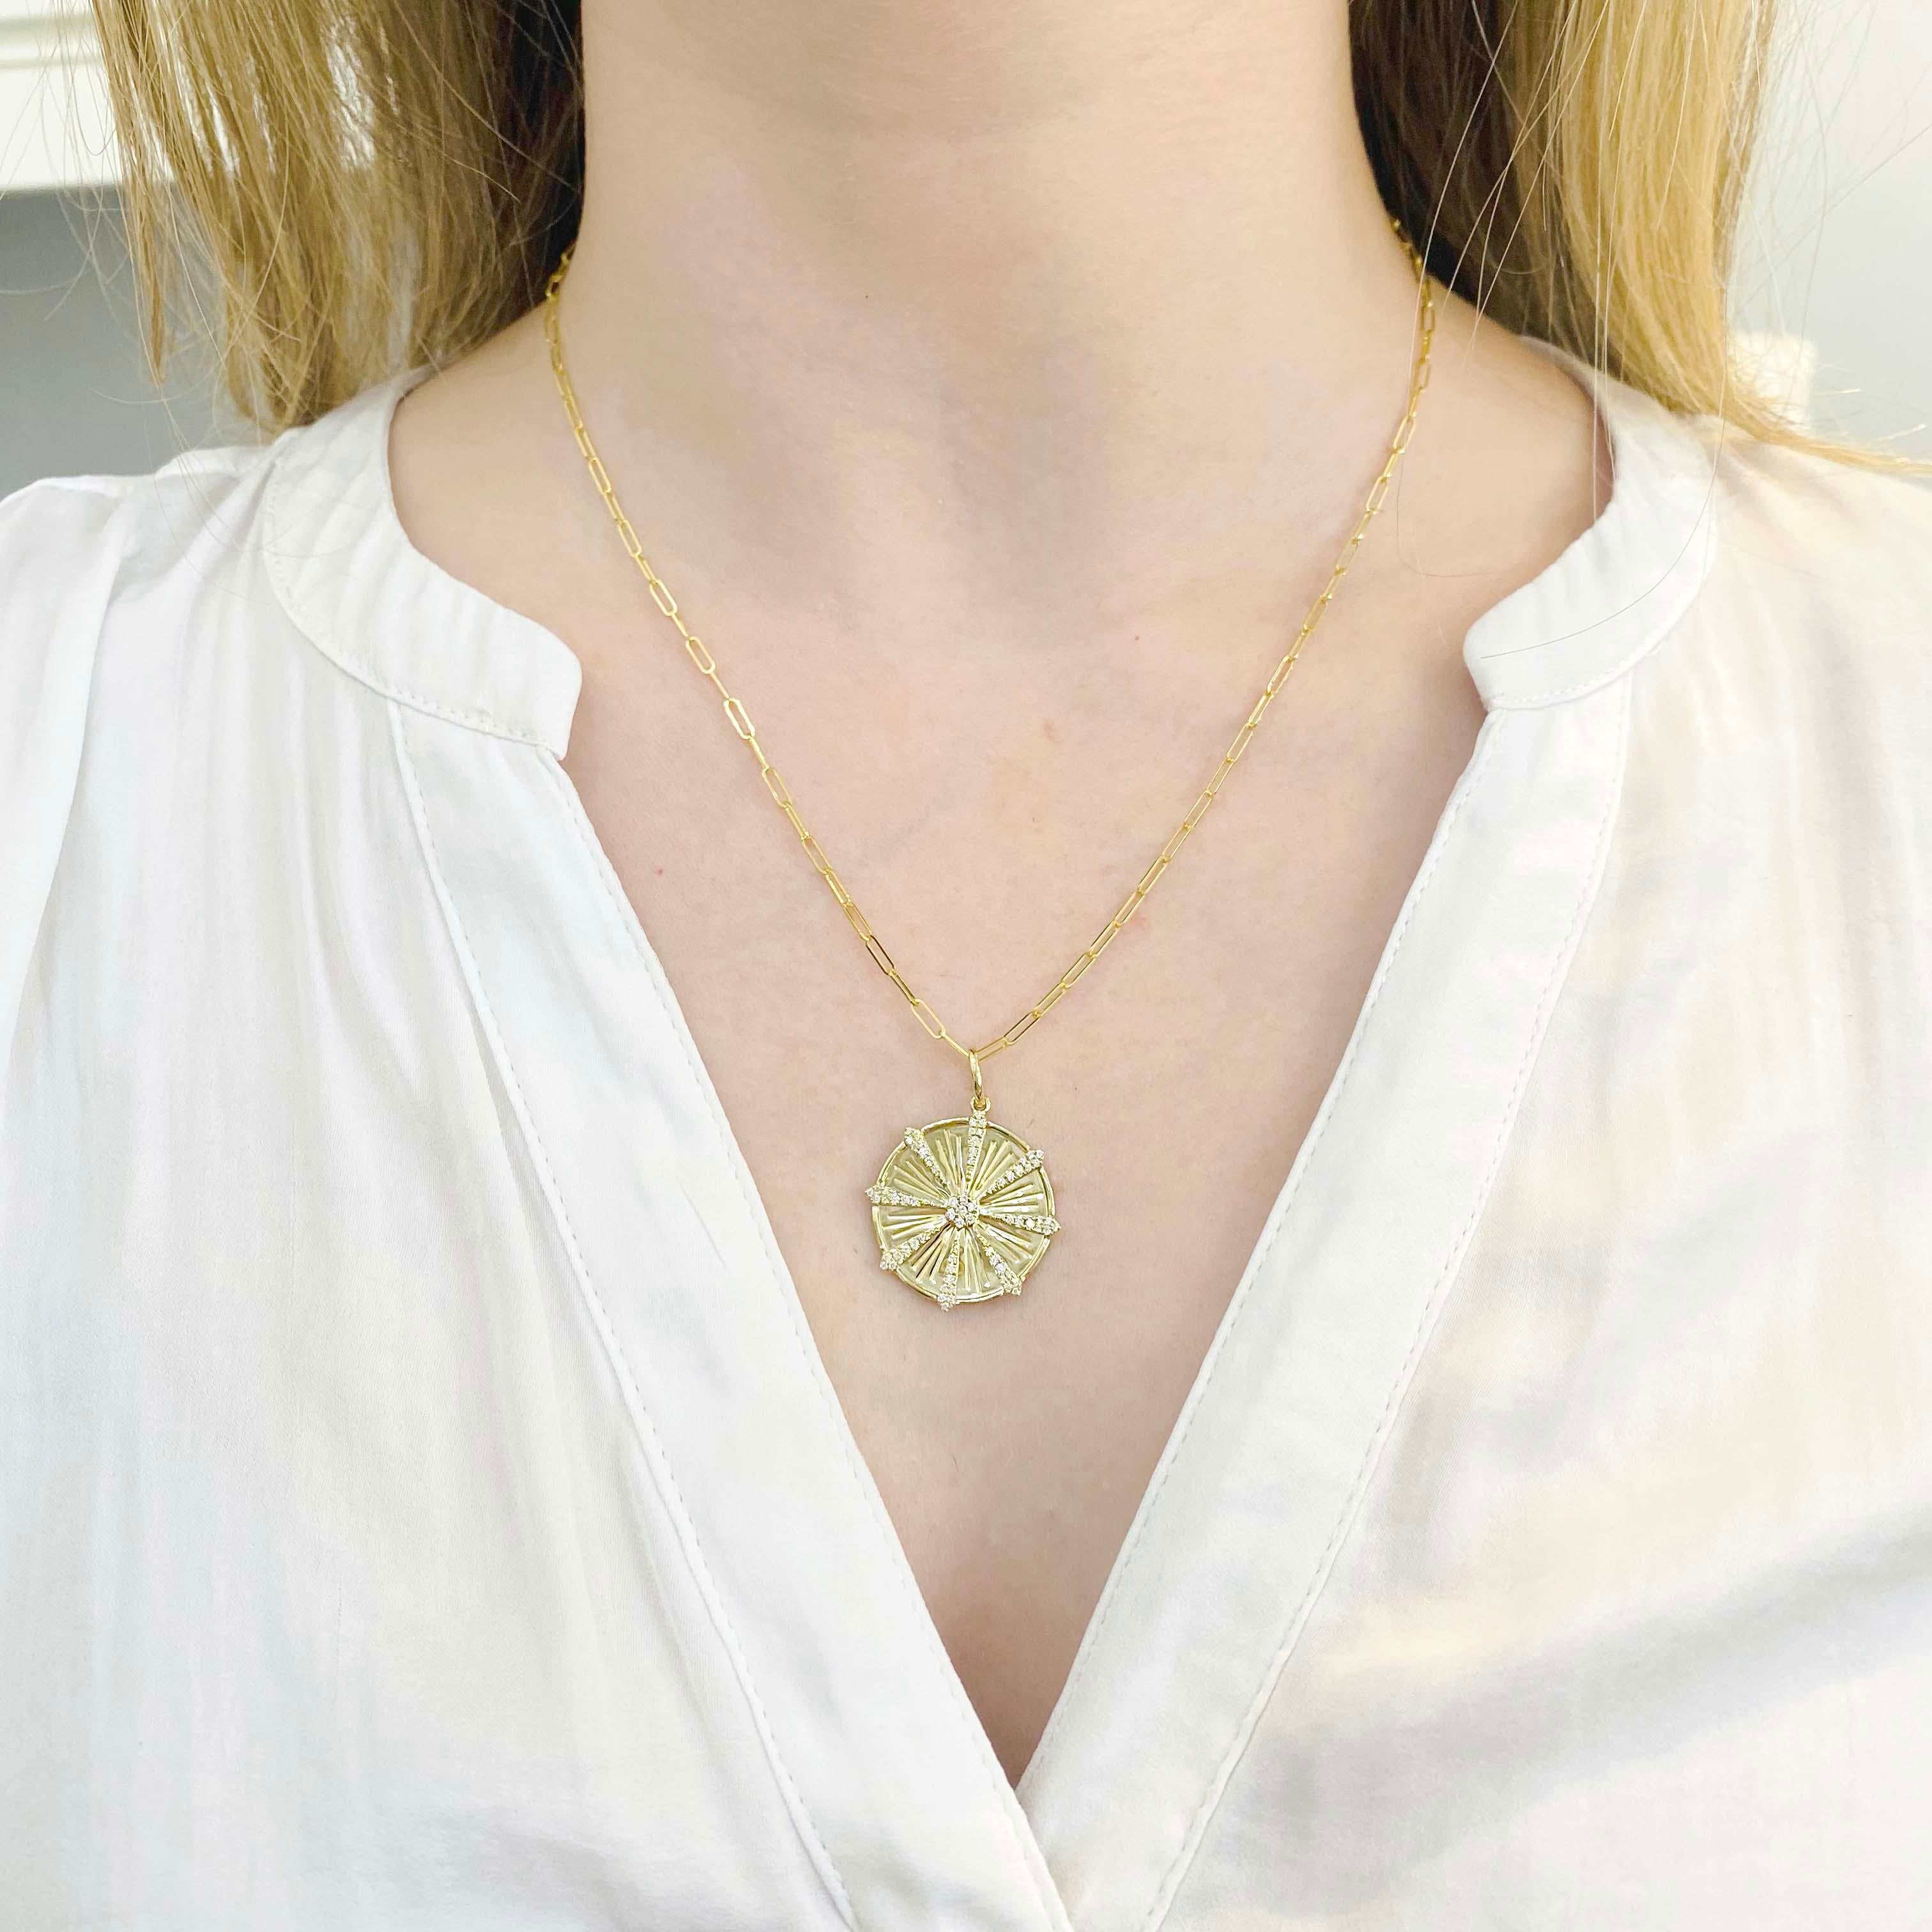 This necklace has such a fun, symmetrical design. It's big enough to make a statement with any outfit! Wear it as a statement signature piece or wear it with other necklaces. This necklace is a custom order and normally takes 3-4 weeks to make.